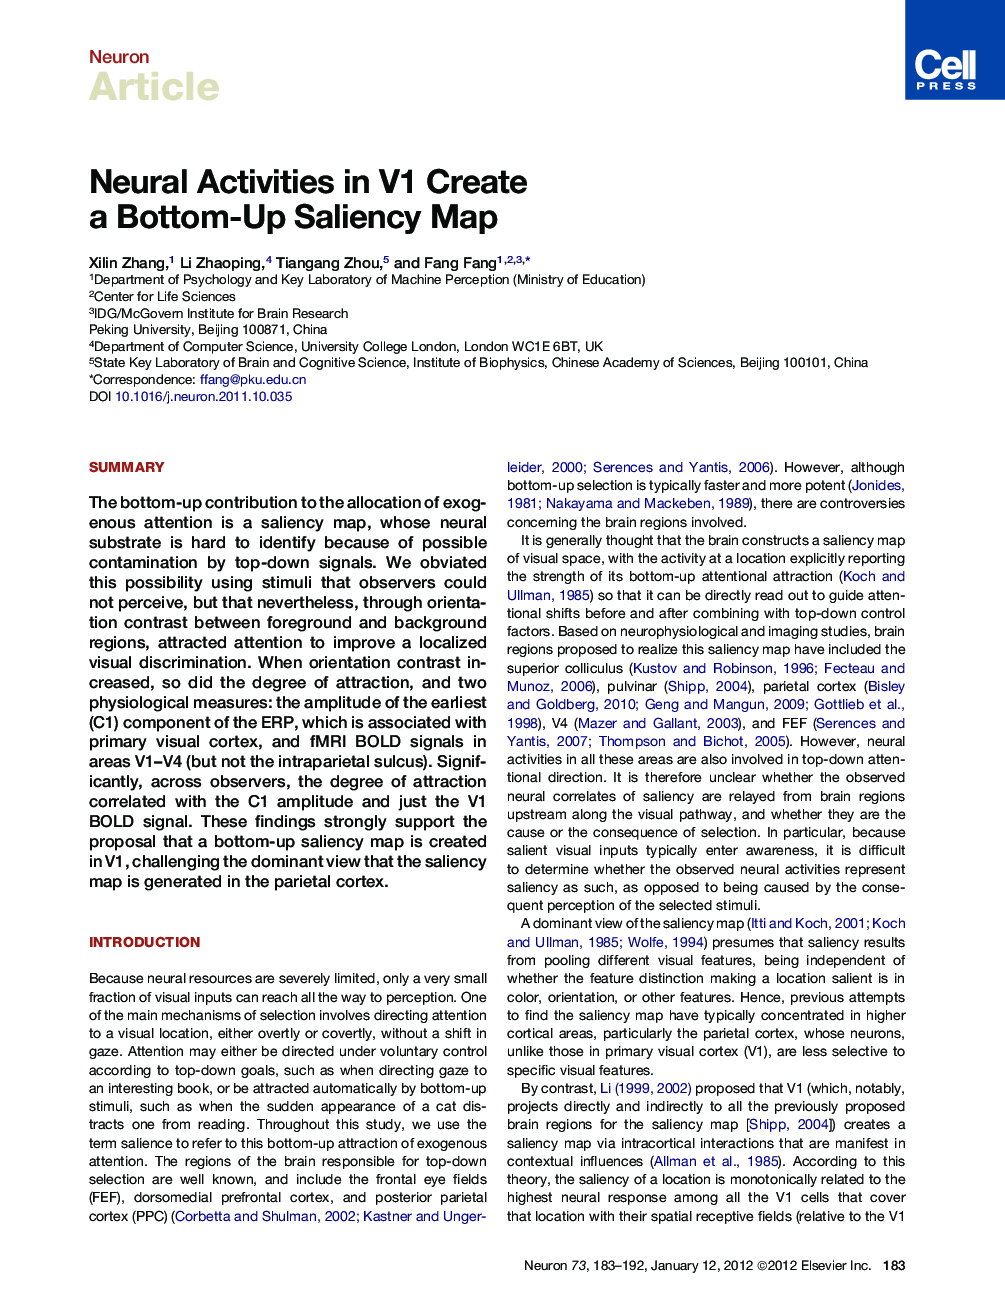 Neural Activities in V1 Create a Bottom-Up Saliency Map